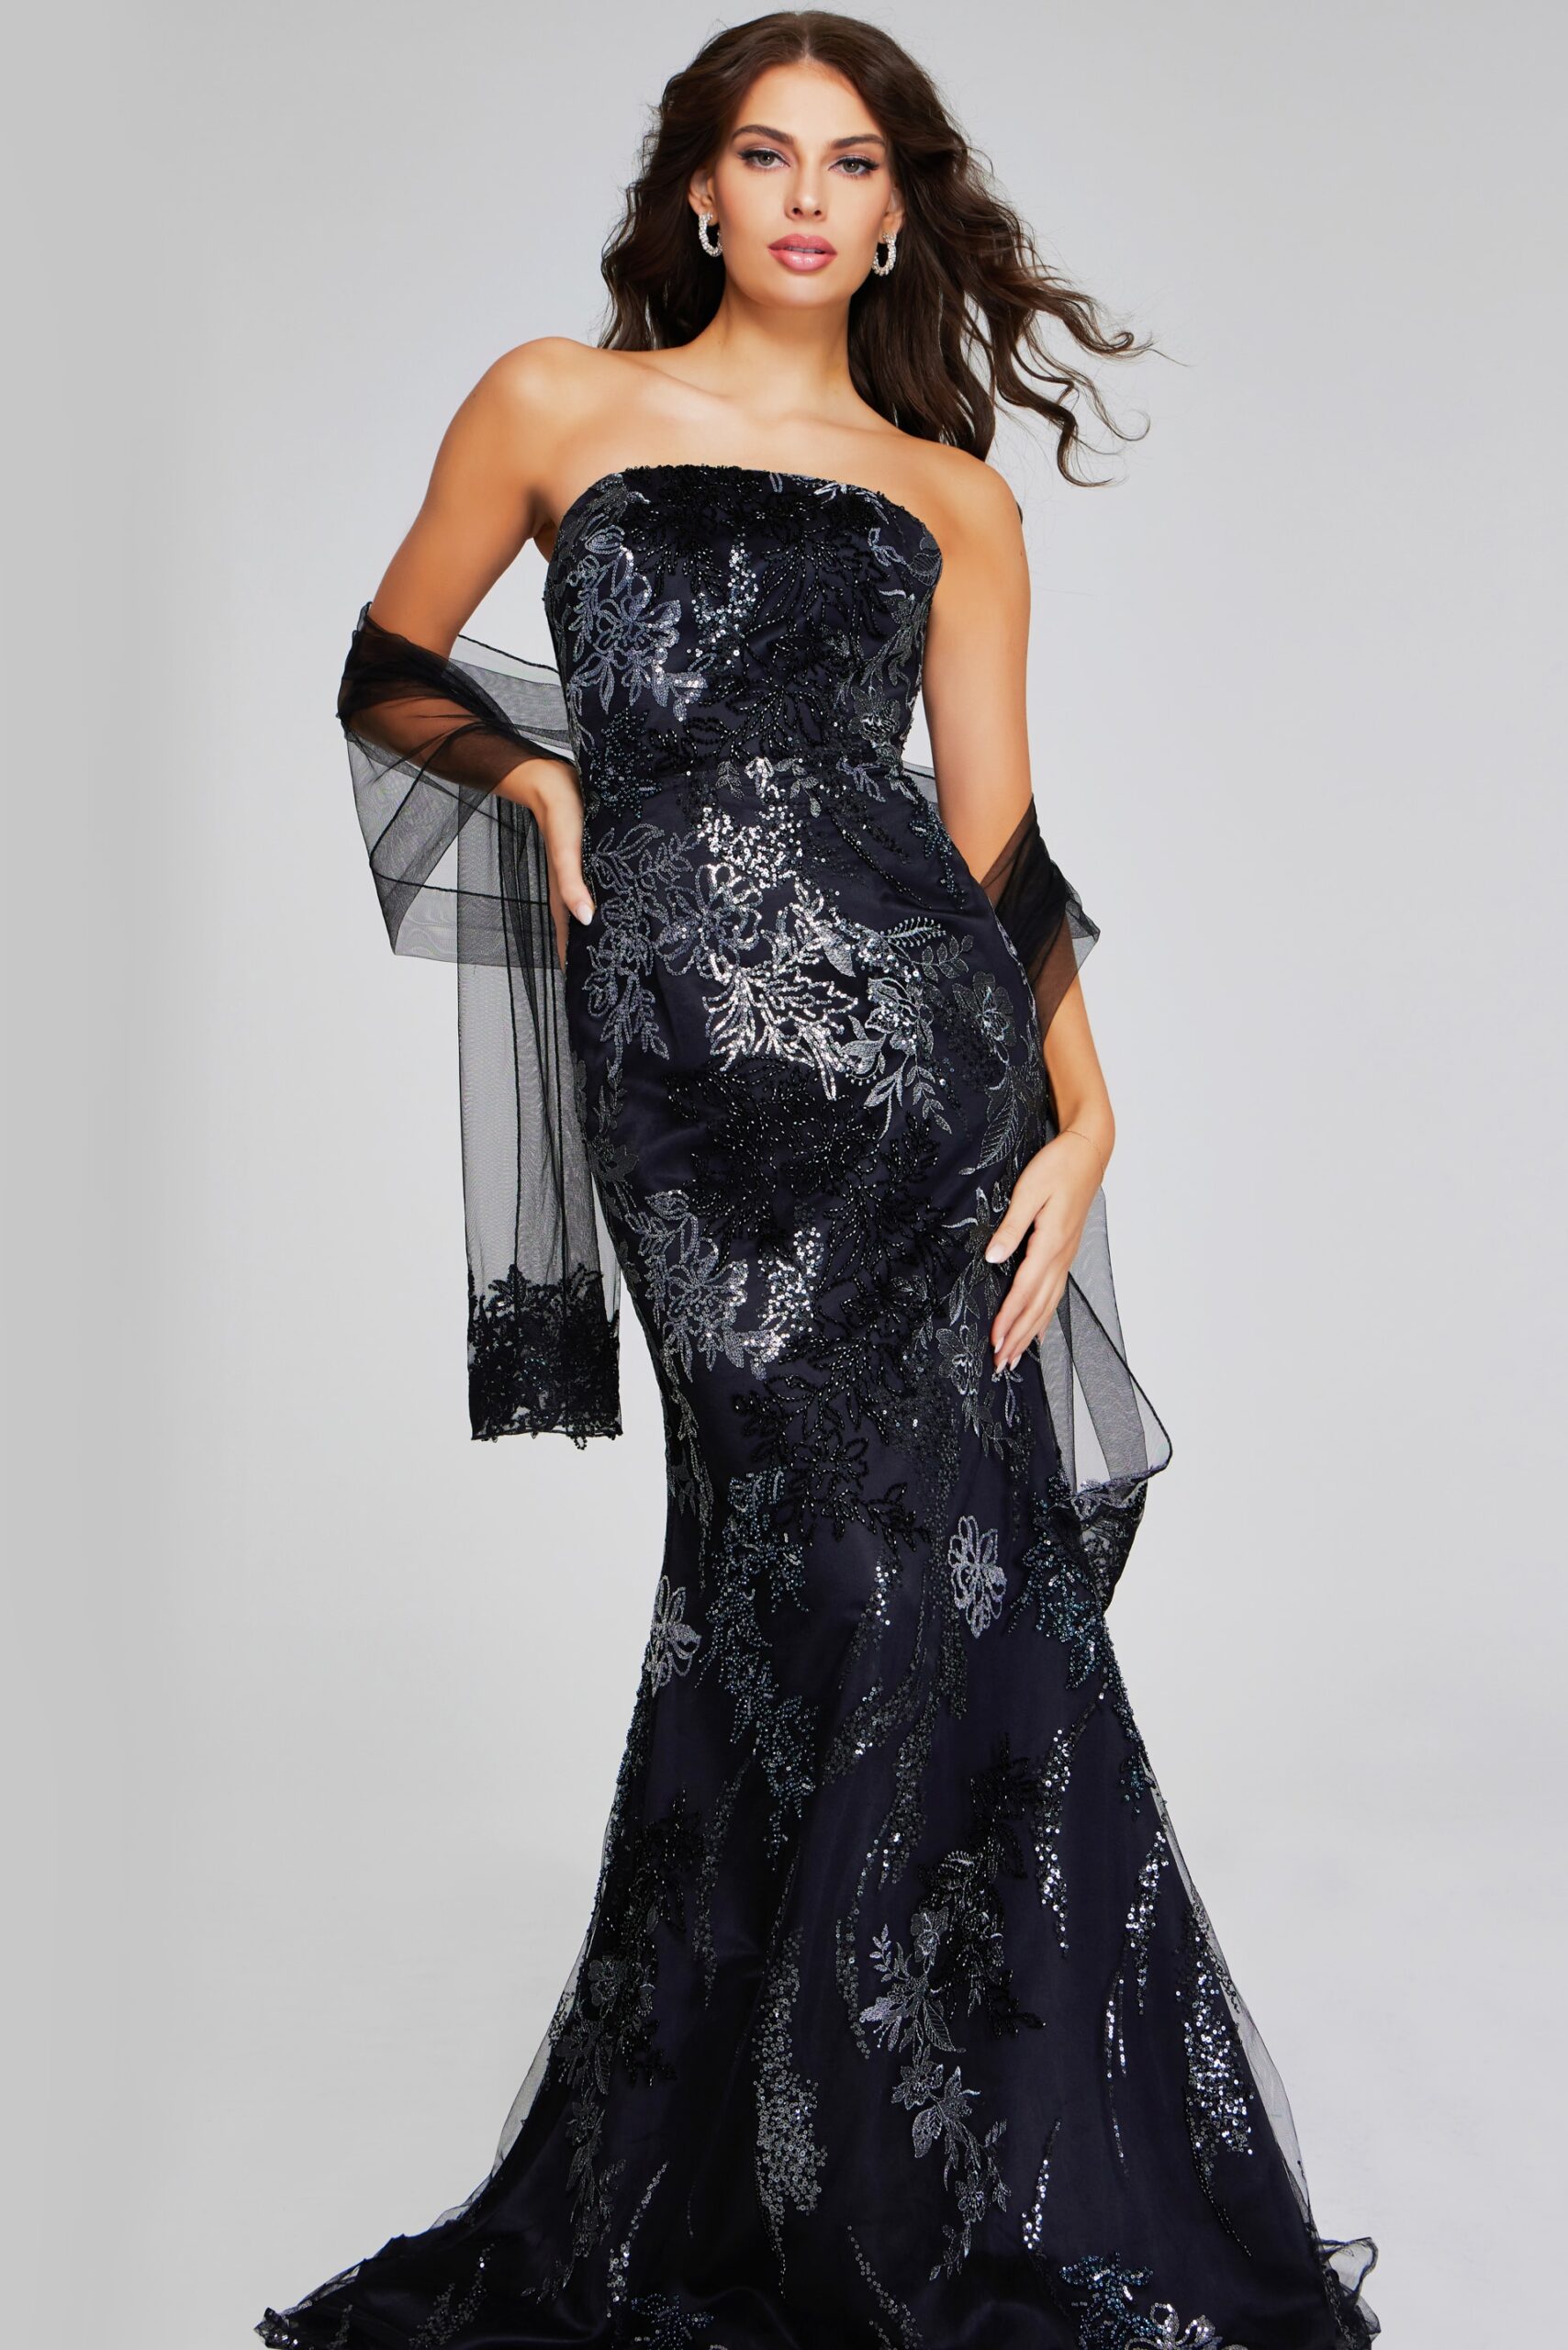 Model wearing Glamorous Black Strapless Gown with Intricate Sequin Embellishments 40604